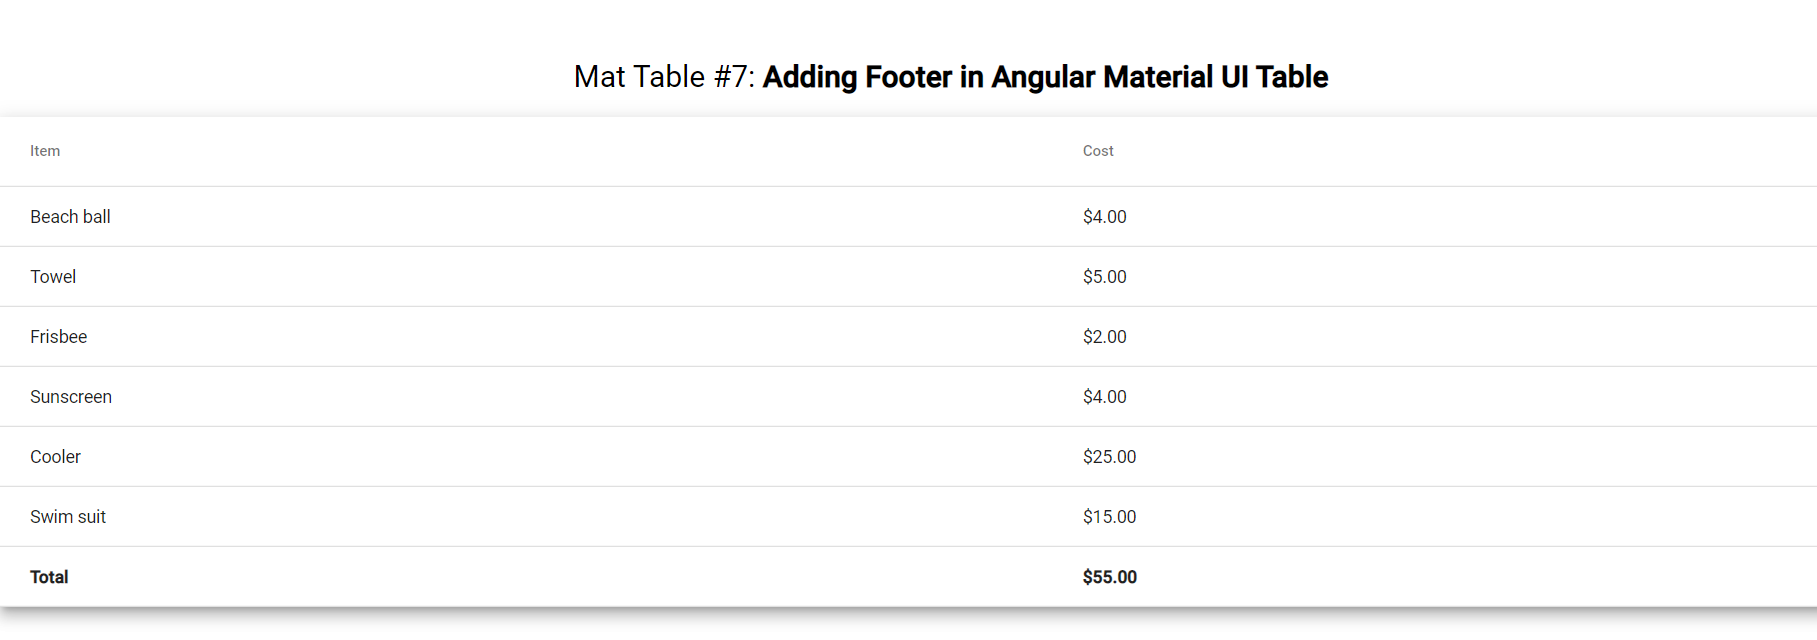 Adding Footer in Angular Material UI Table